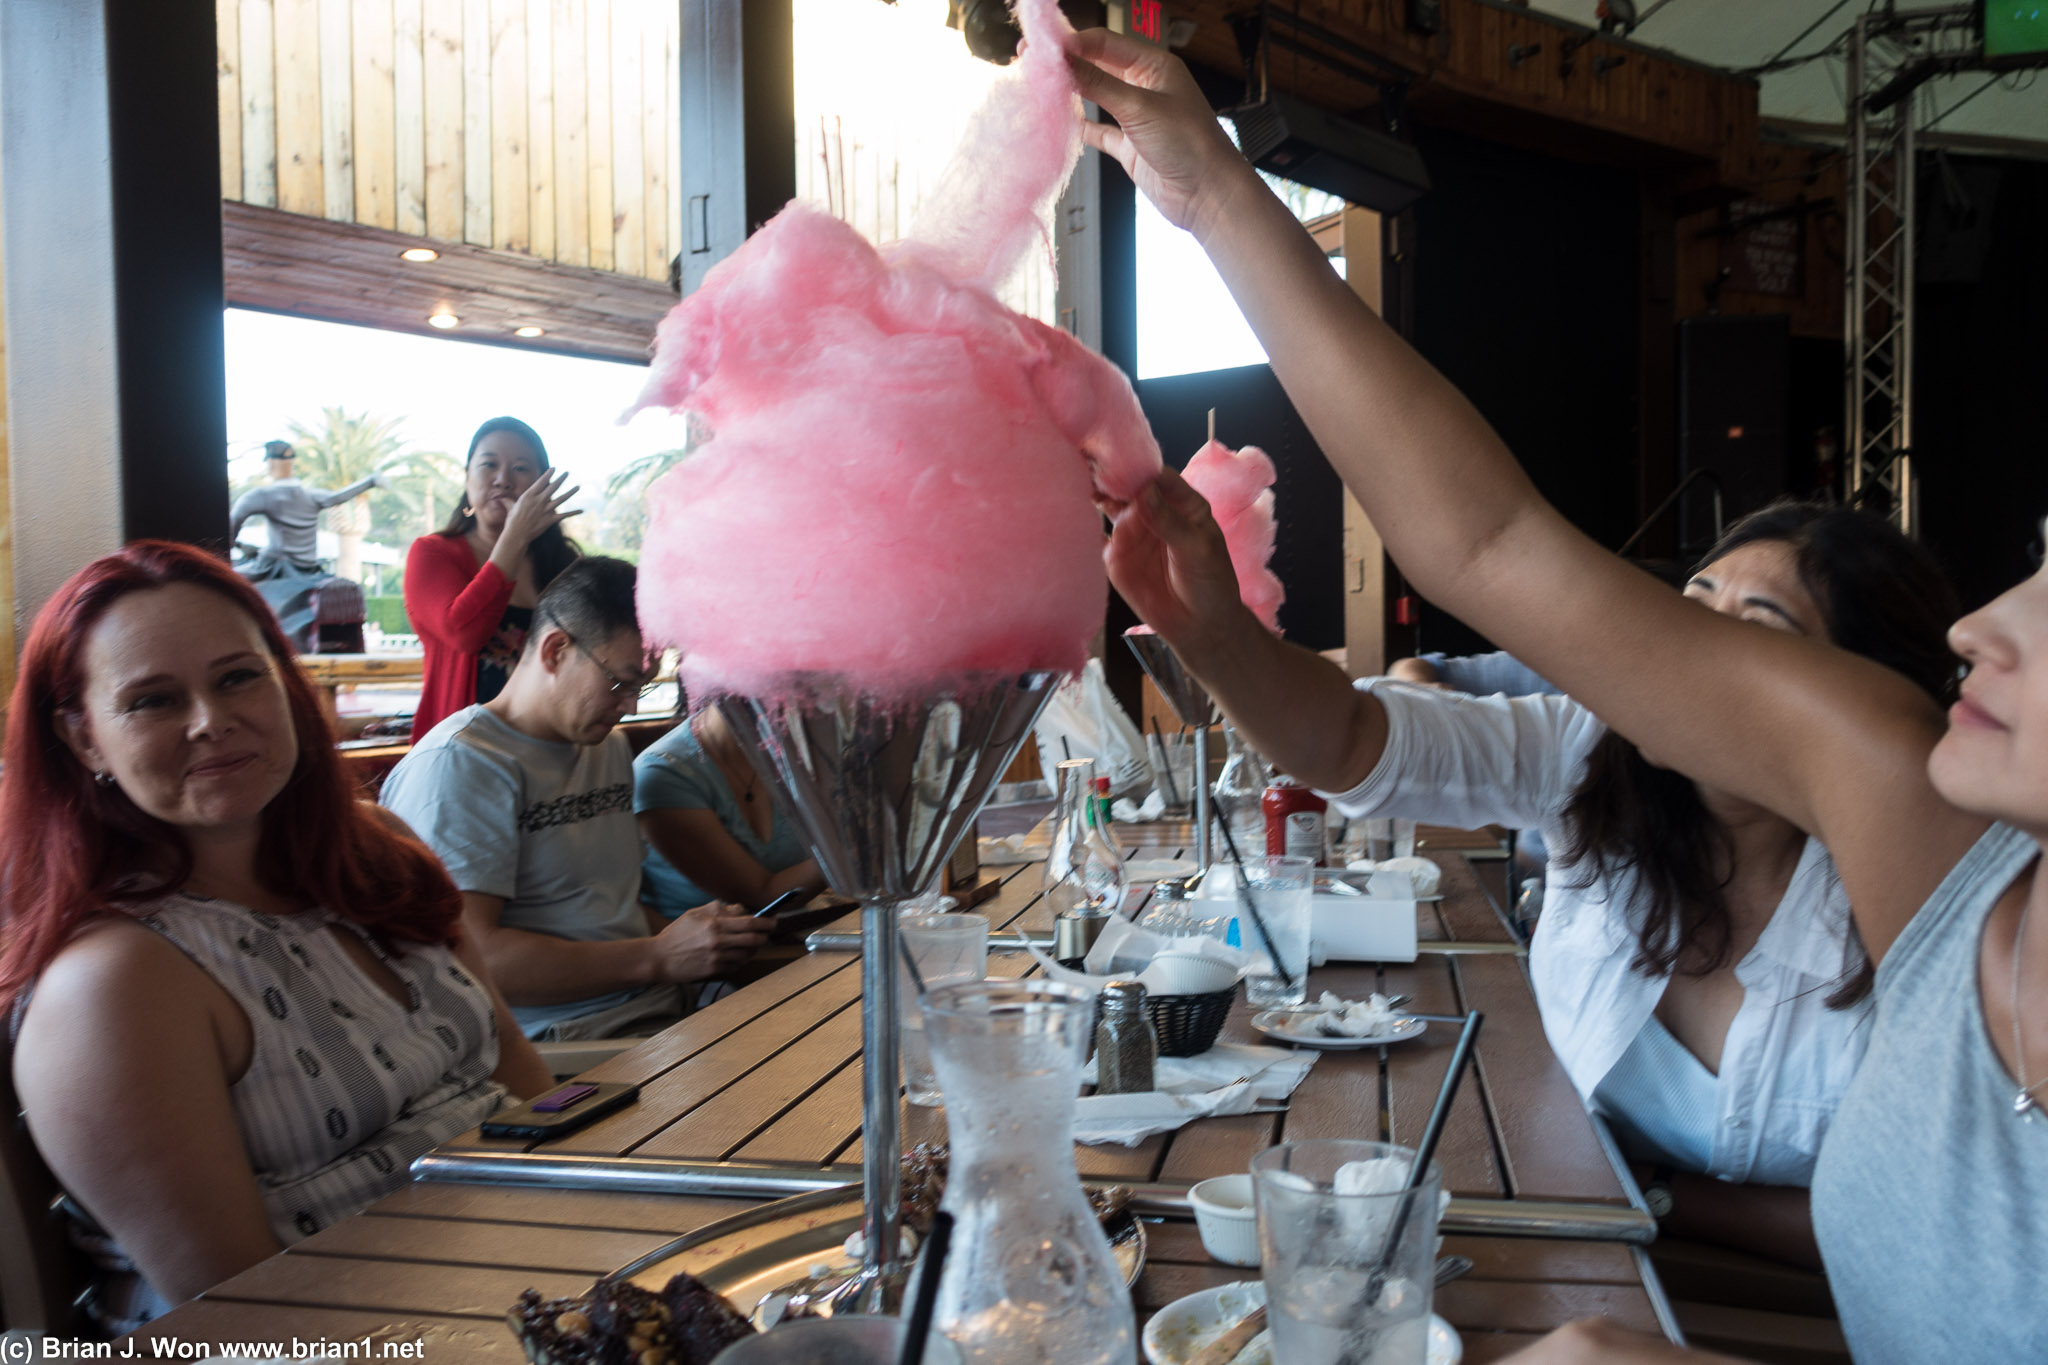 Attacking the other two cotton candies.